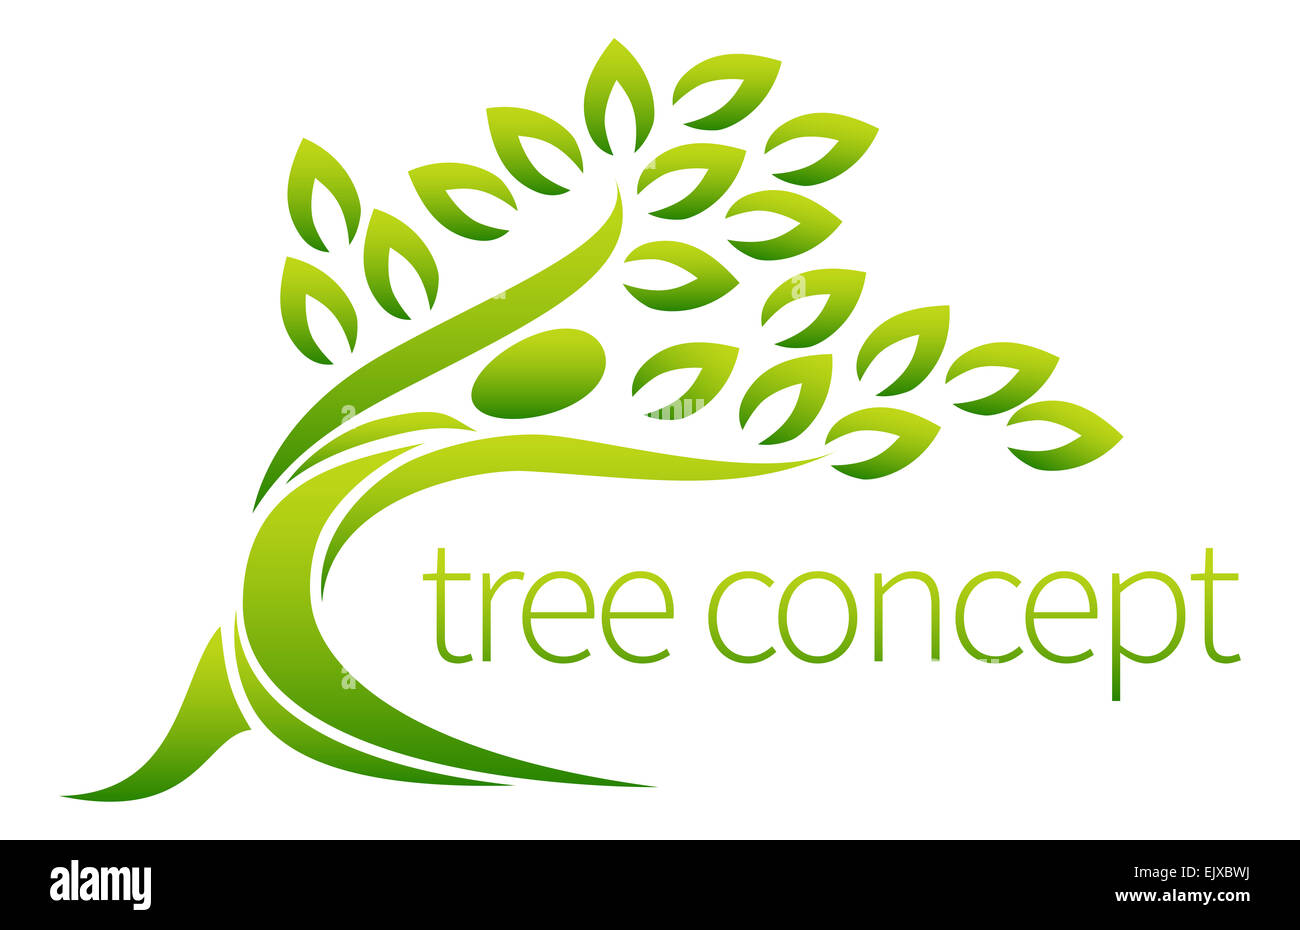 Tree person symbol concept of a stylised tree in the shape of a human figure with leaves, lends itself to being used with text Stock Photo